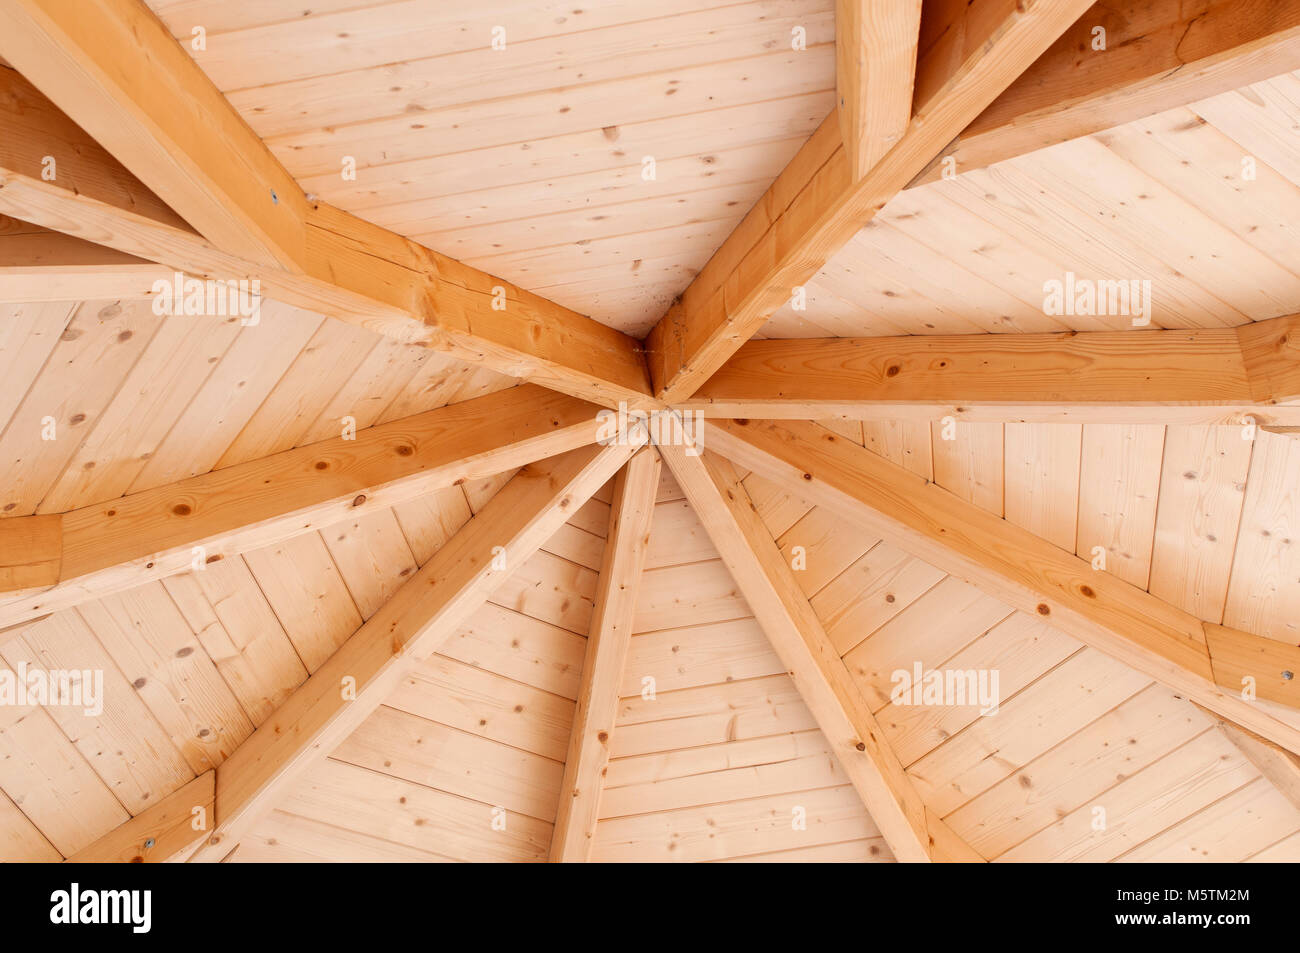 Wooden Ceiling Boards Gazebos System Stock Photo 175719564